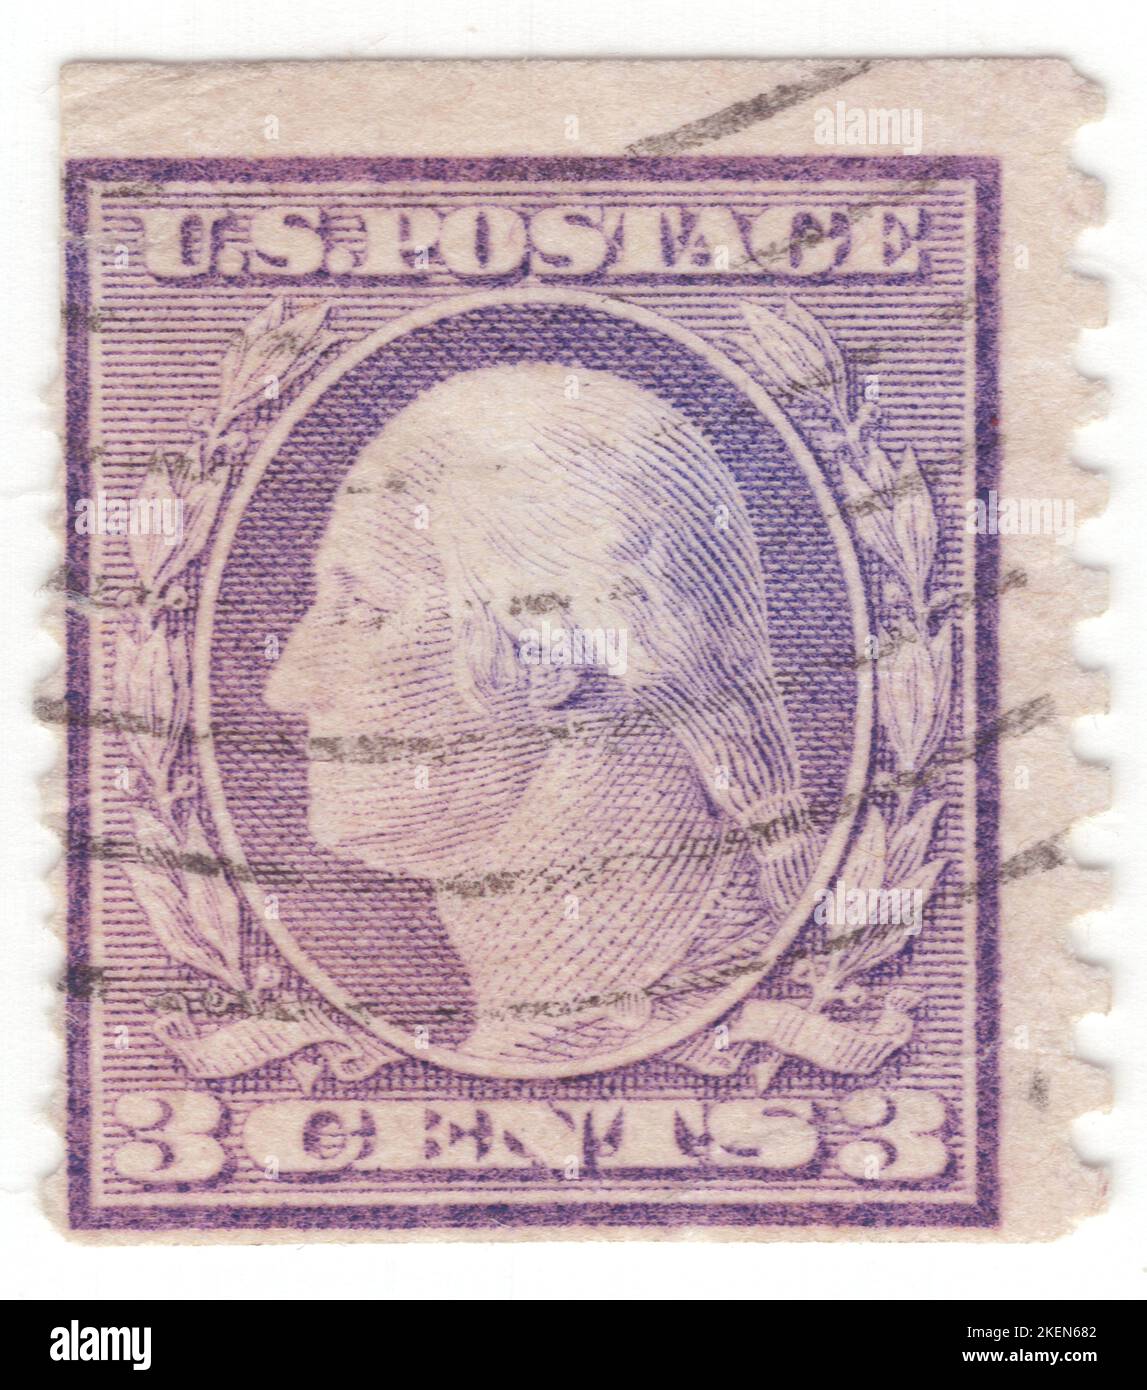 USA - 1916: An 3 cents violet postage stamp depicting portrait of George Washington. American military officer, statesman, and Founding Father who served as the first president of the United States from 1789 to 1797. Appointed by the Continental Congress as commander of the Continental Army, Washington led the Patriot forces to victory in the American Revolutionary War and served as the president of the Constitutional Convention of 1787, which created the Constitution of the United States and the American federal government. Washington has been called the 'Father of his Country' Stock Photo